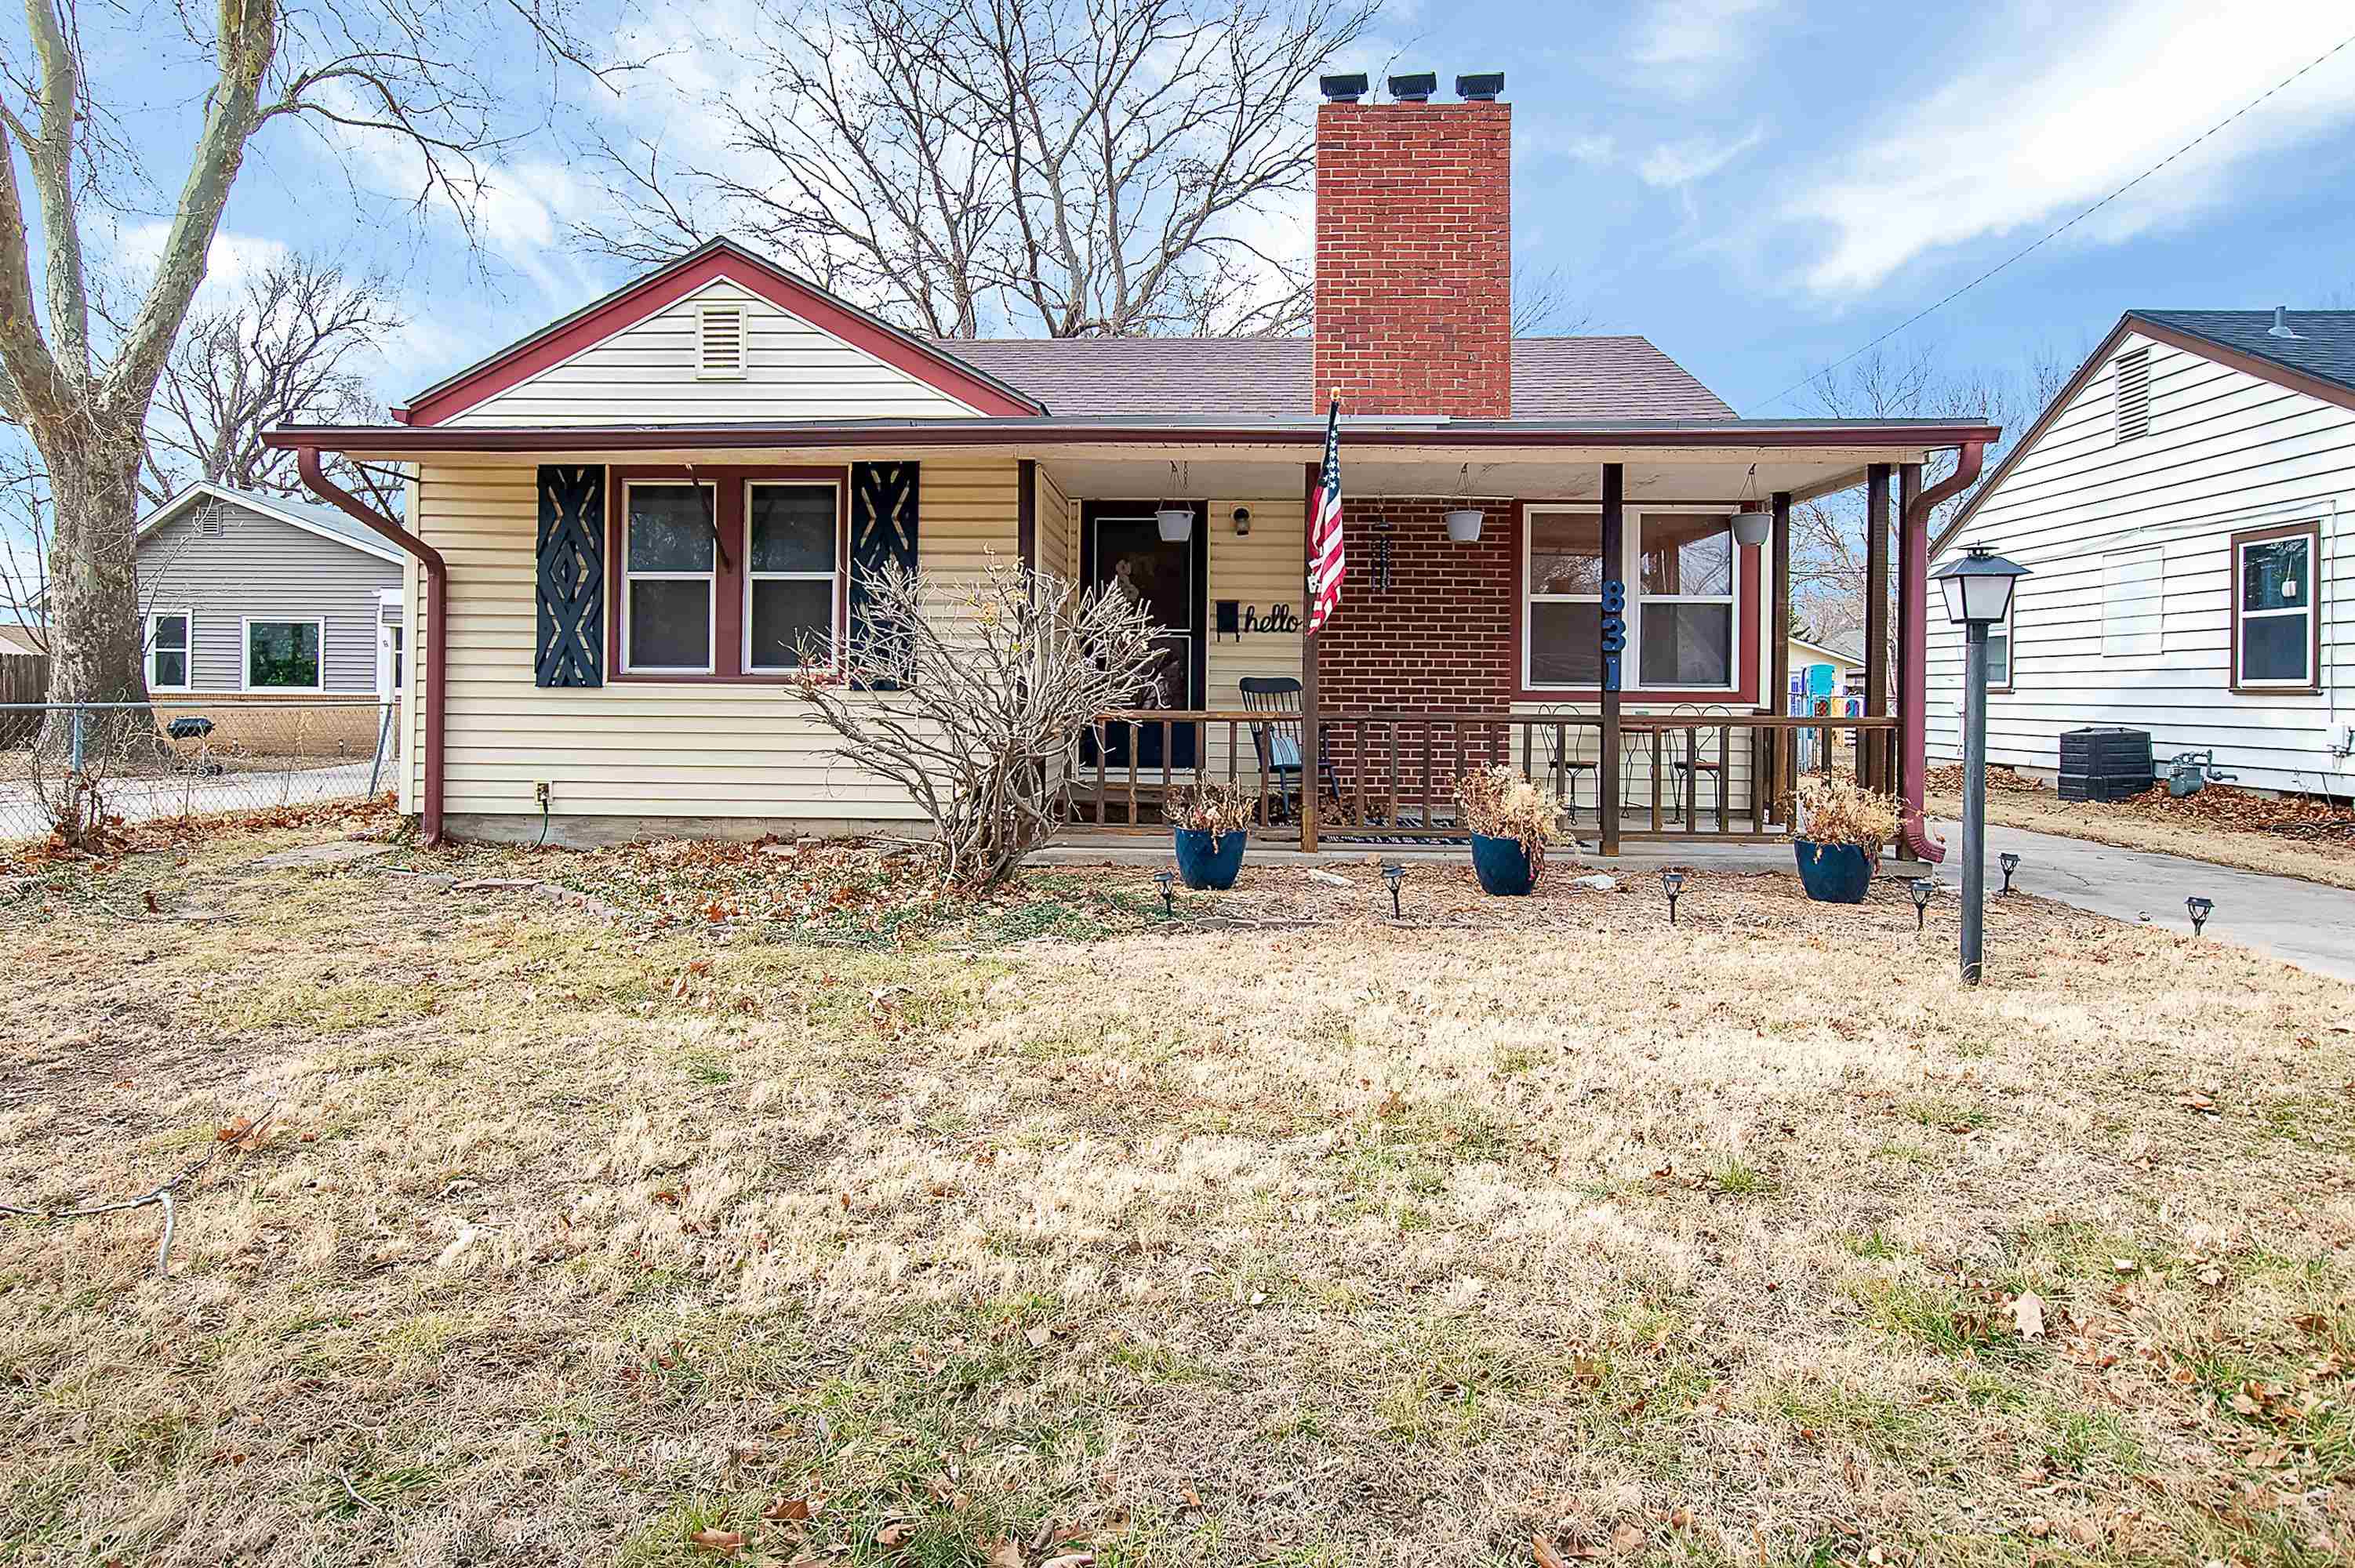 CUTE AS A BUTTON … MOVE IN READY ... NEW UPDATES!  Looking for the perfect starter home?? With this 